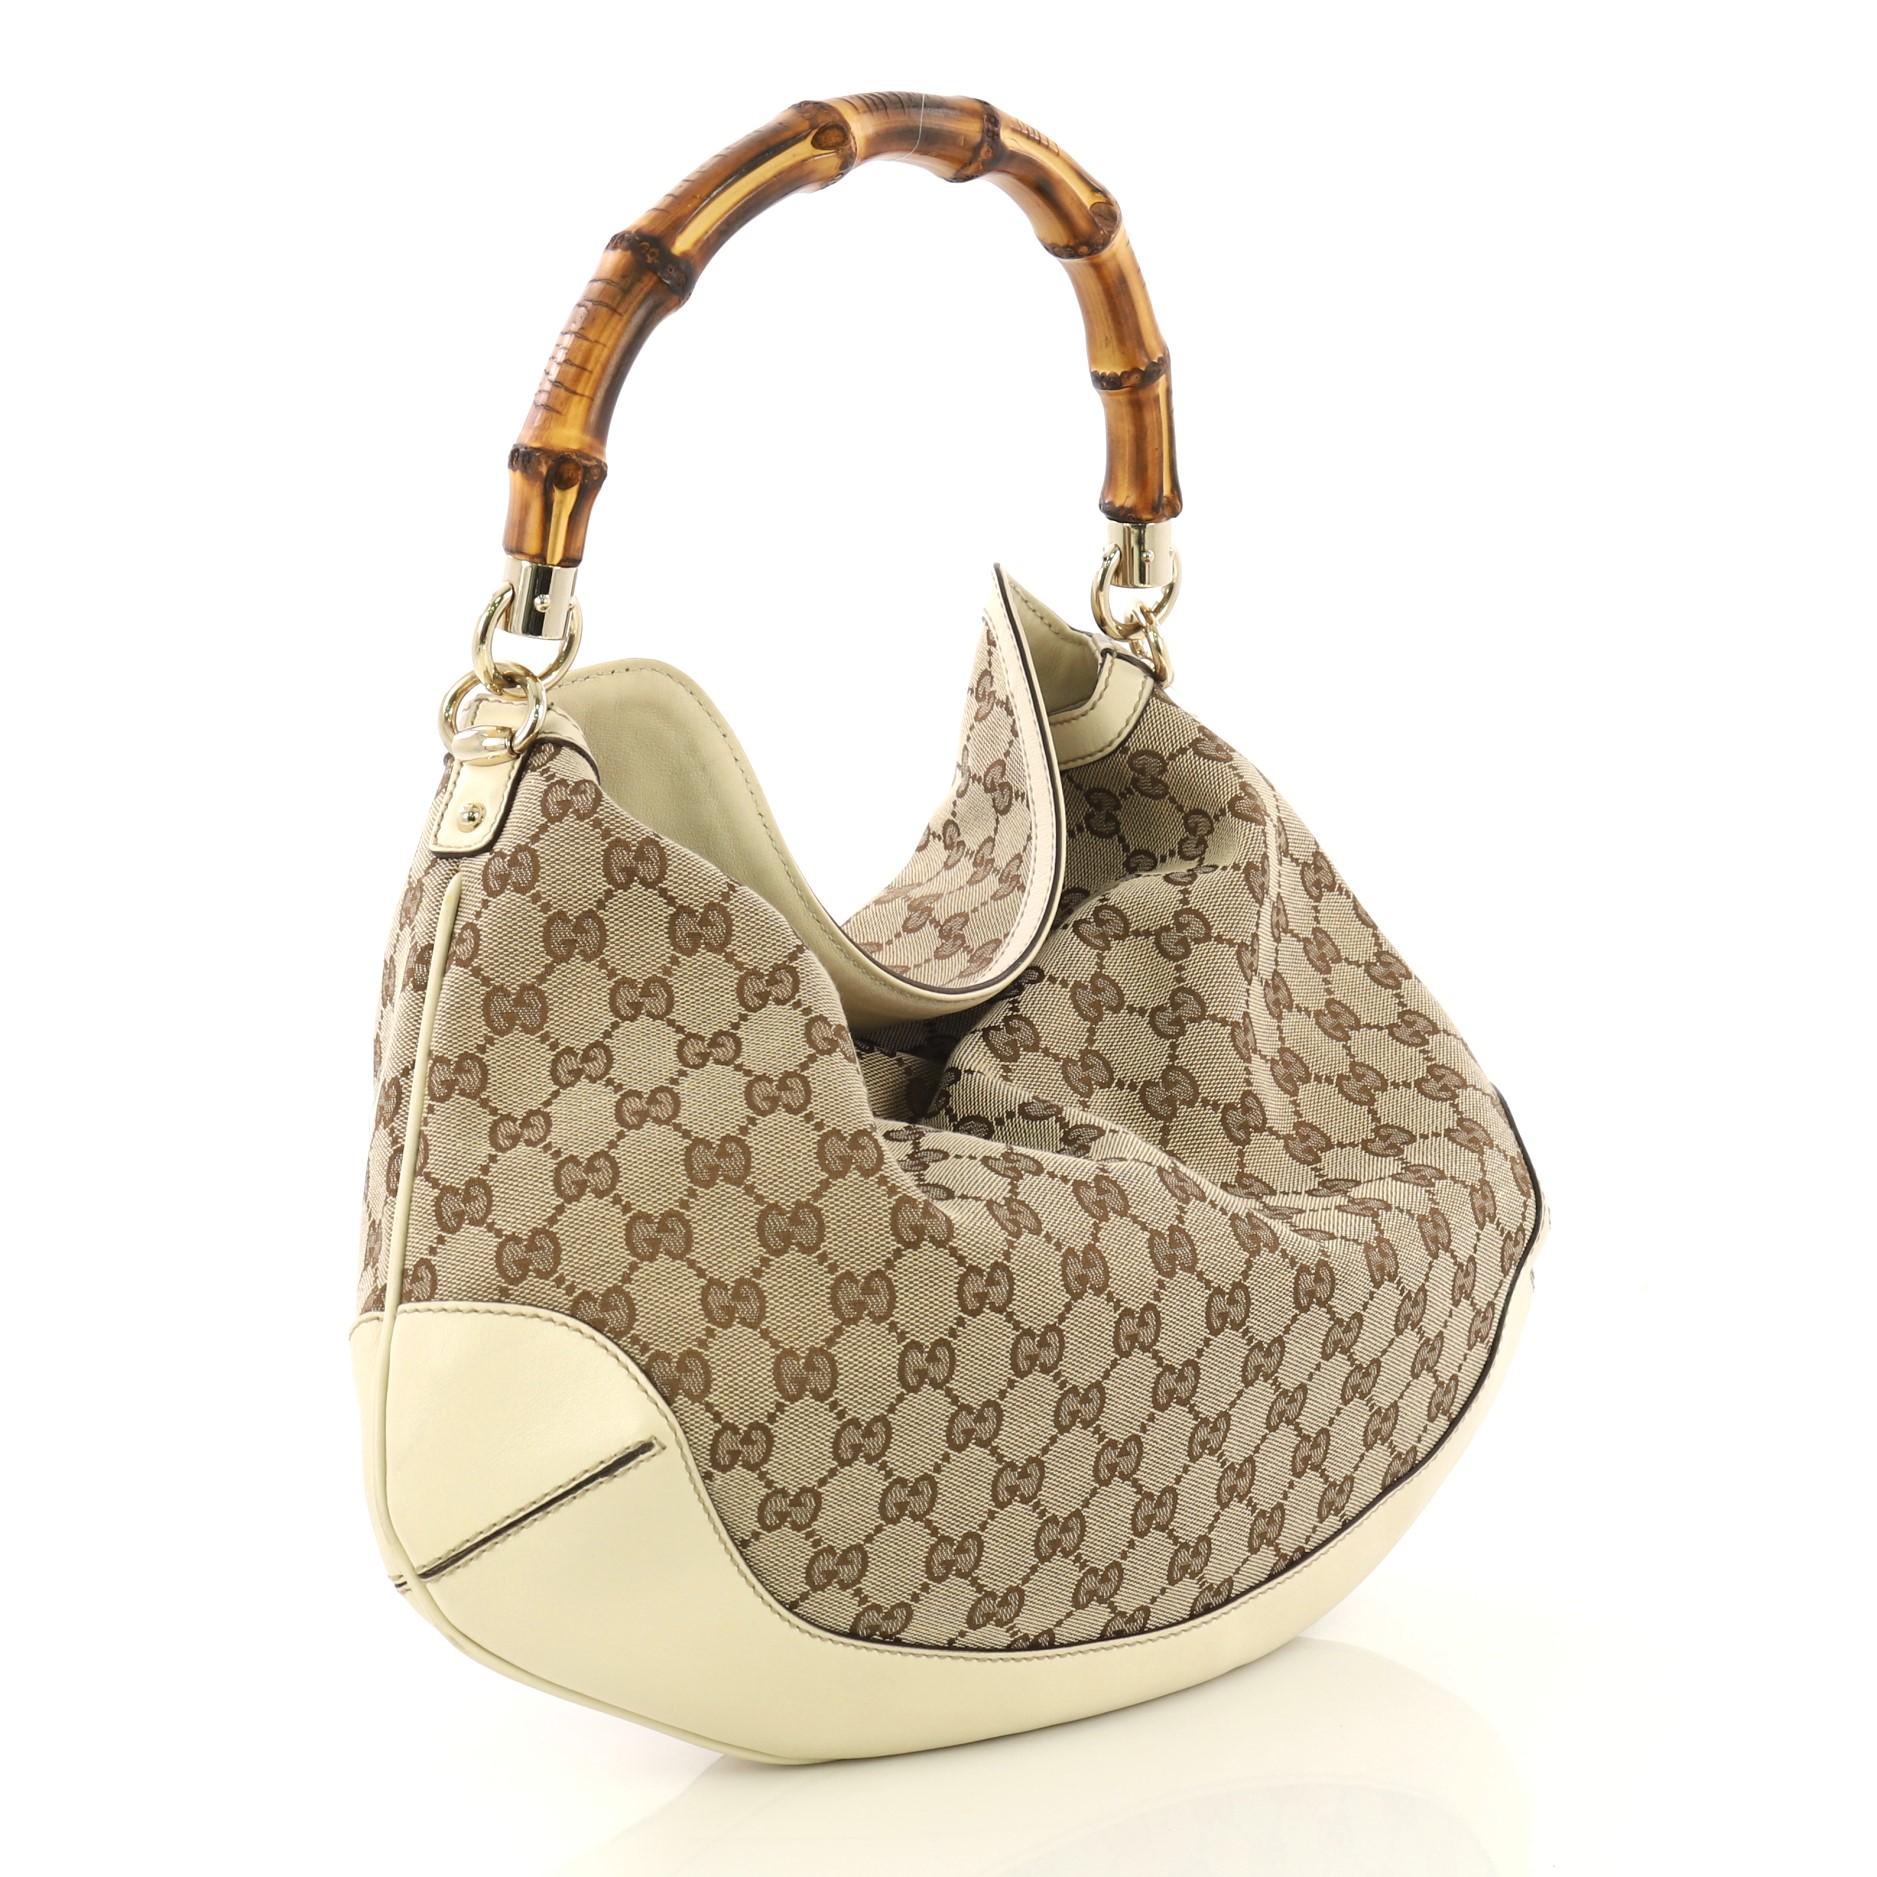 This Gucci Diana Bamboo Shoulder Bag GG Canvas Medium, crafted from beige GG canvas and cream leather, features bamboo loop handle, leather base, and gold-tone hardware. Its wide top opening showcases a brown fabric interior with side zip and slip